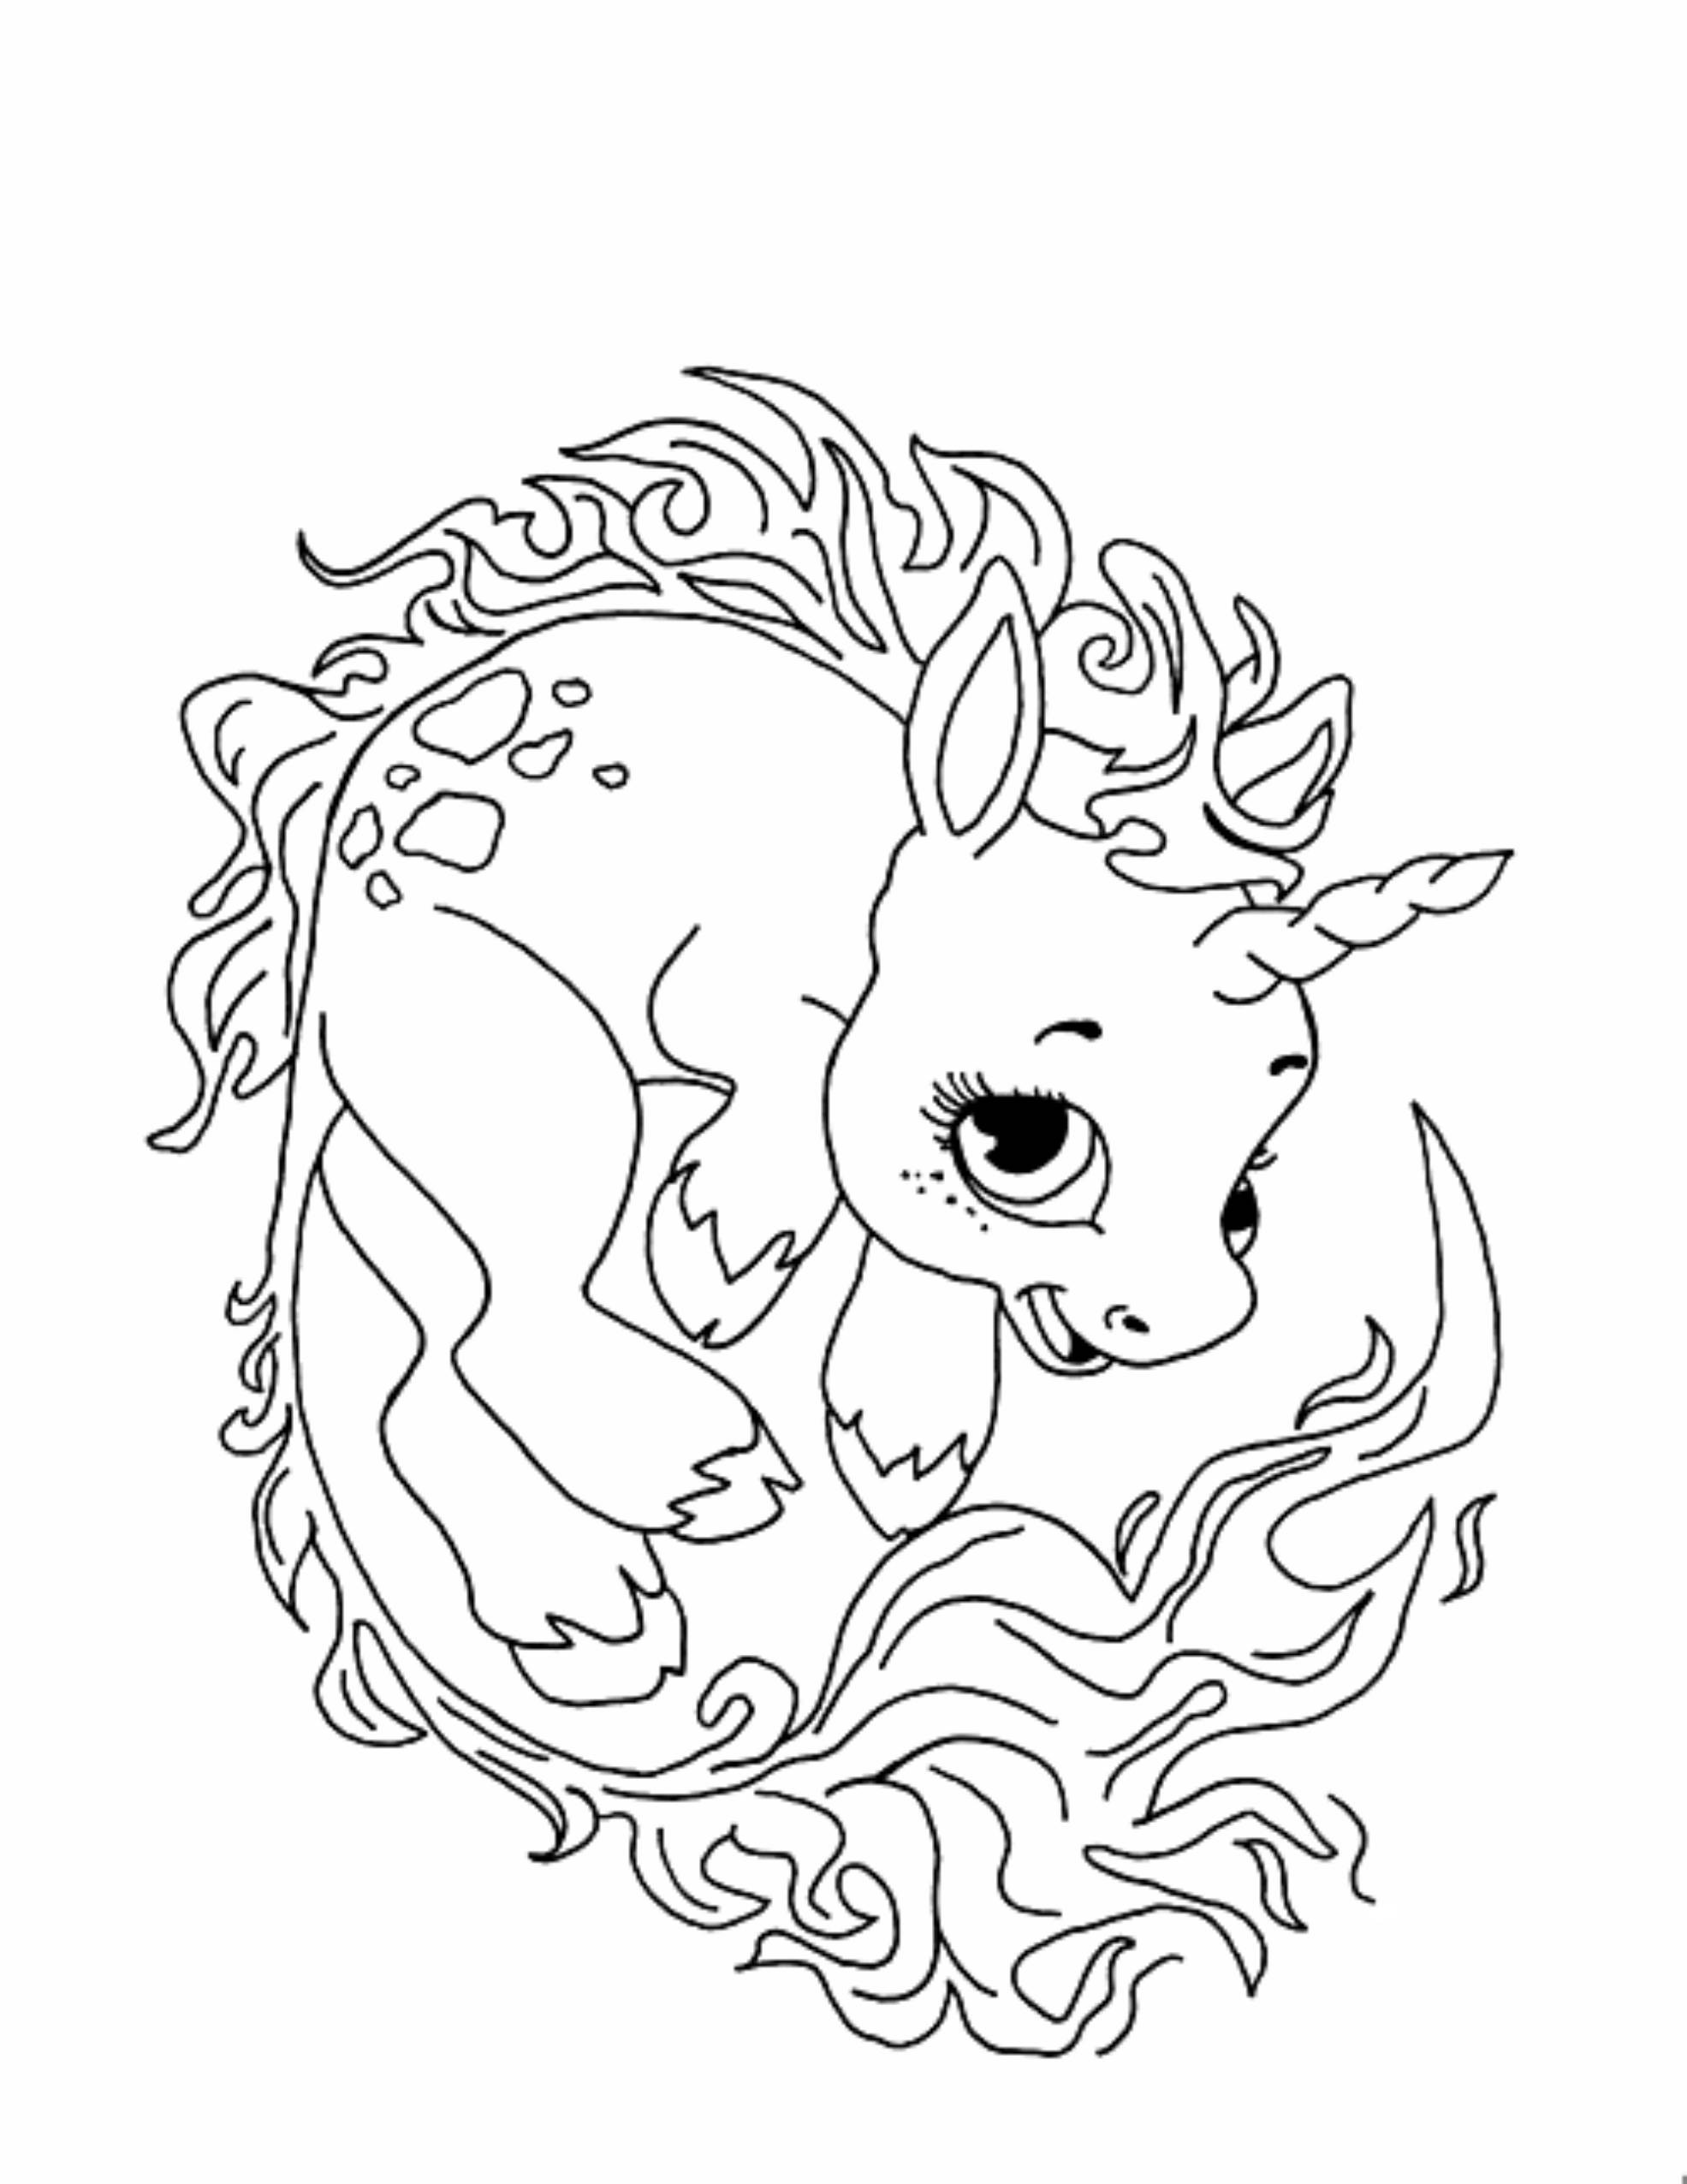 Printable Coloring Pages Unicorn
 Print & Download Unicorn Coloring Pages for Children